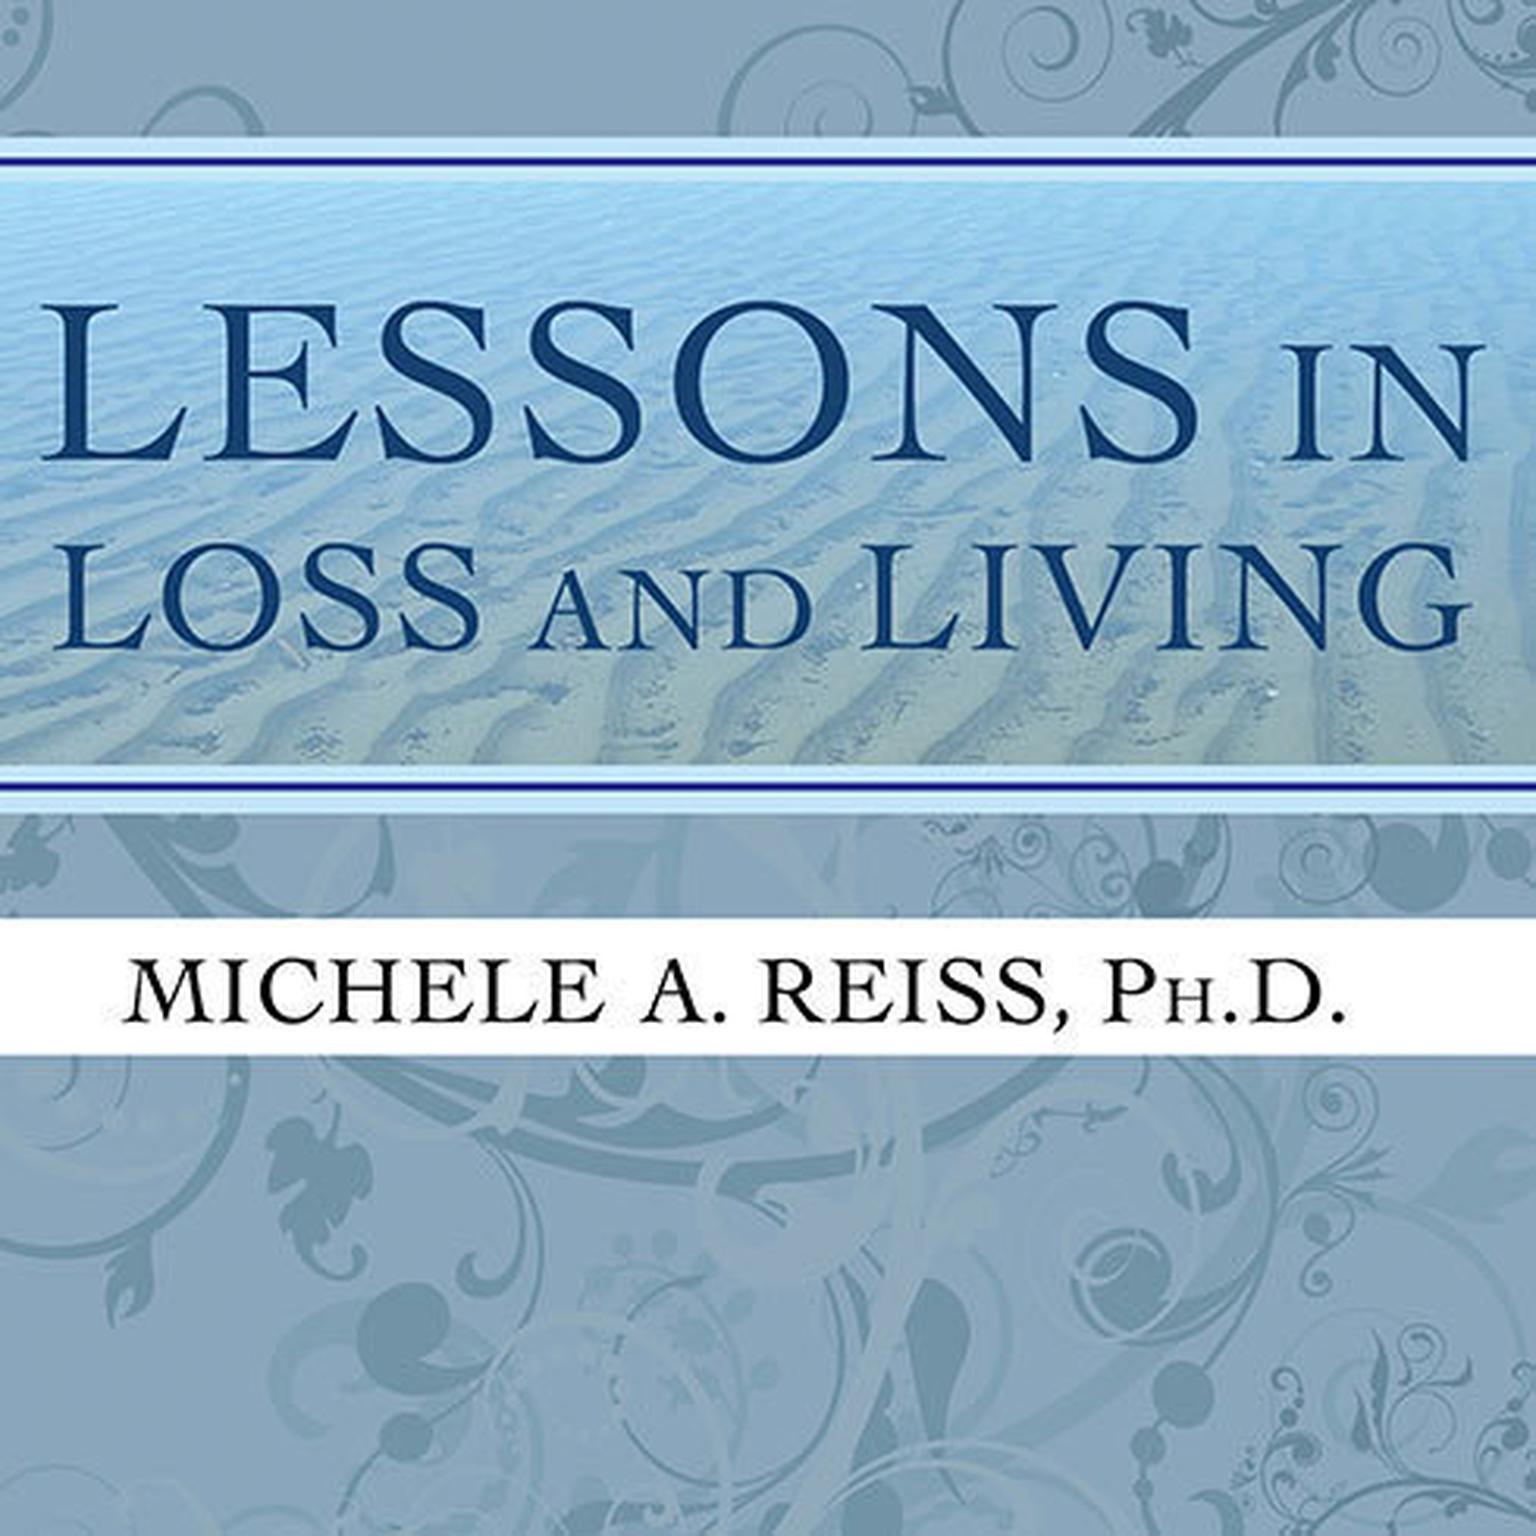 Lessons in Loss and Living: Hope and Guidance for Confronting Serious Illness and Grief Audiobook, by Michele A. Reiss